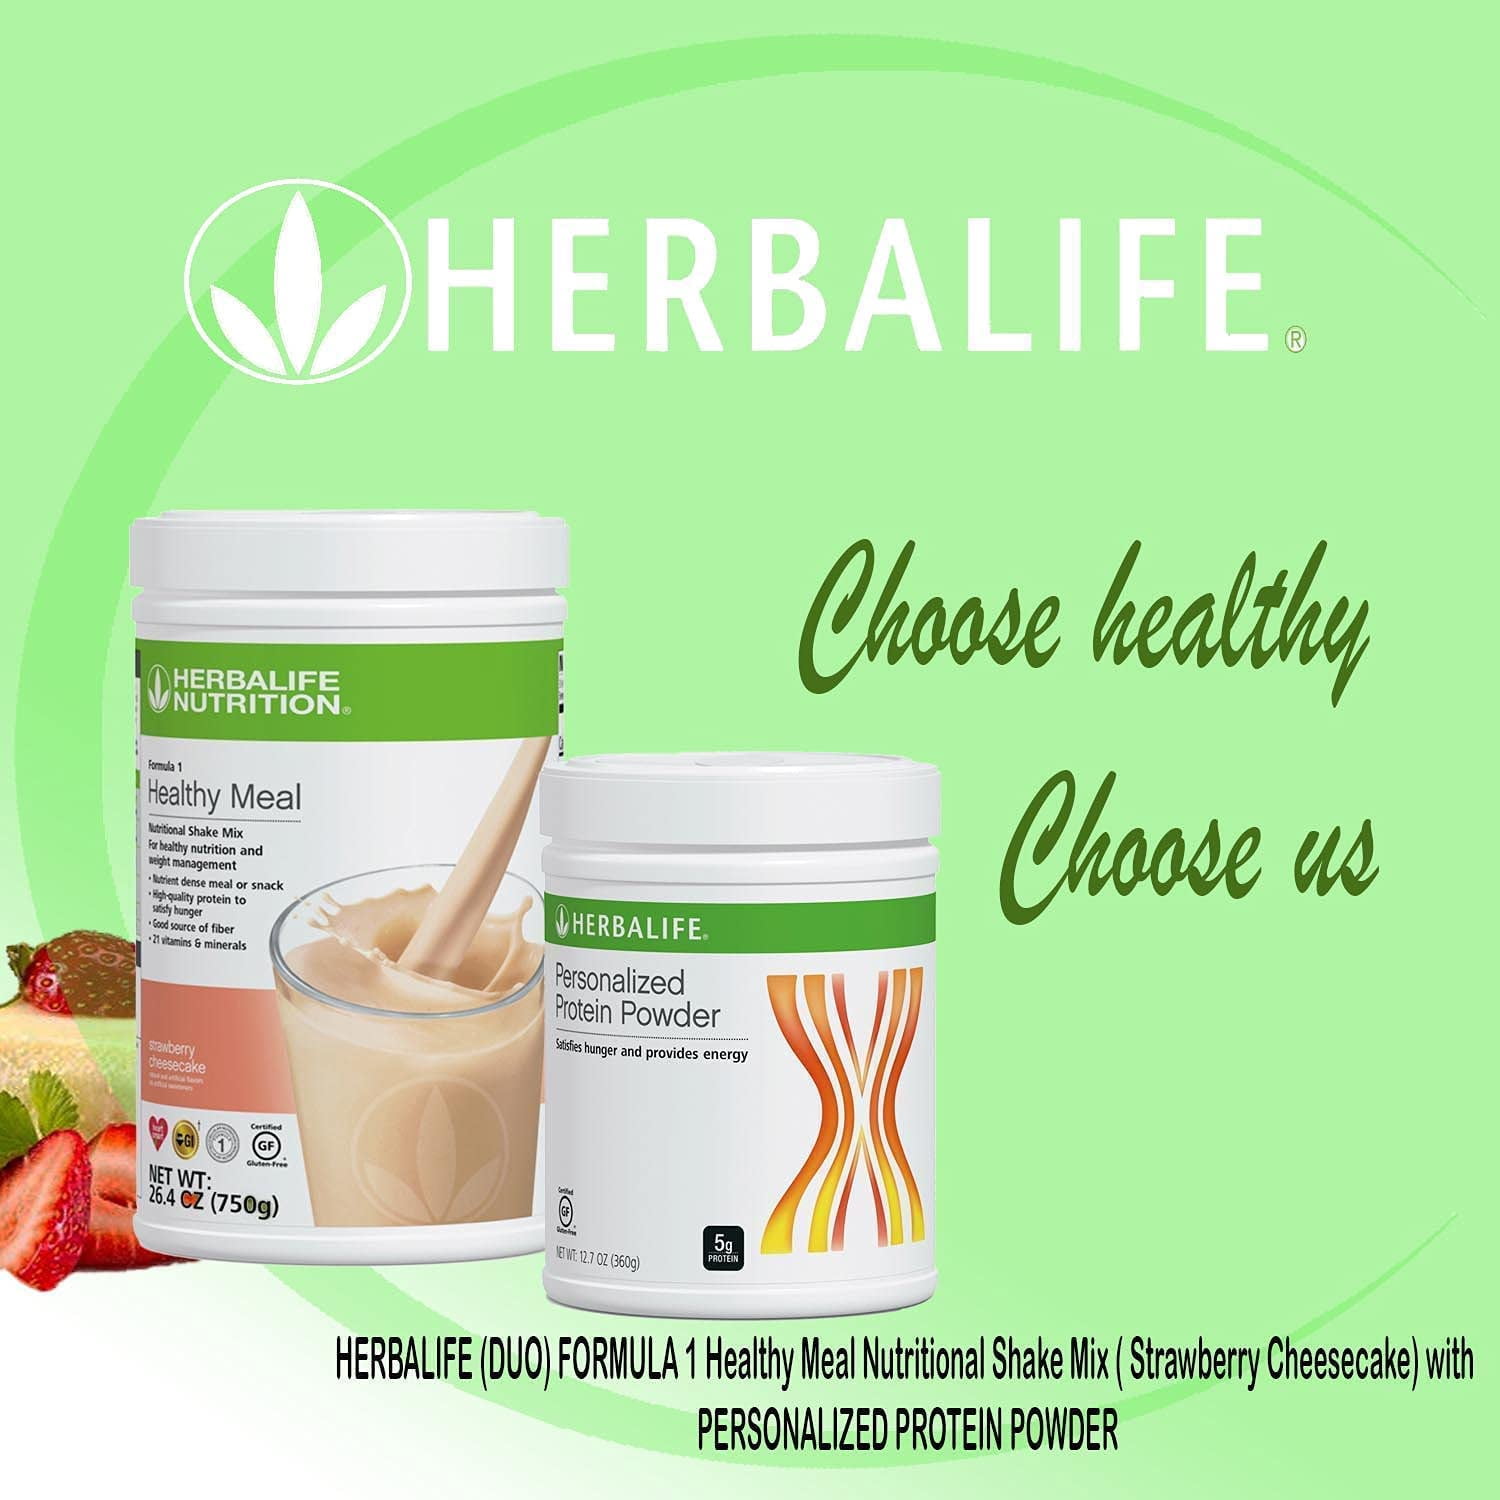 NEW Herbalife Formula 1 Healthy Meal Nutritional Shake Mix Free Shipping